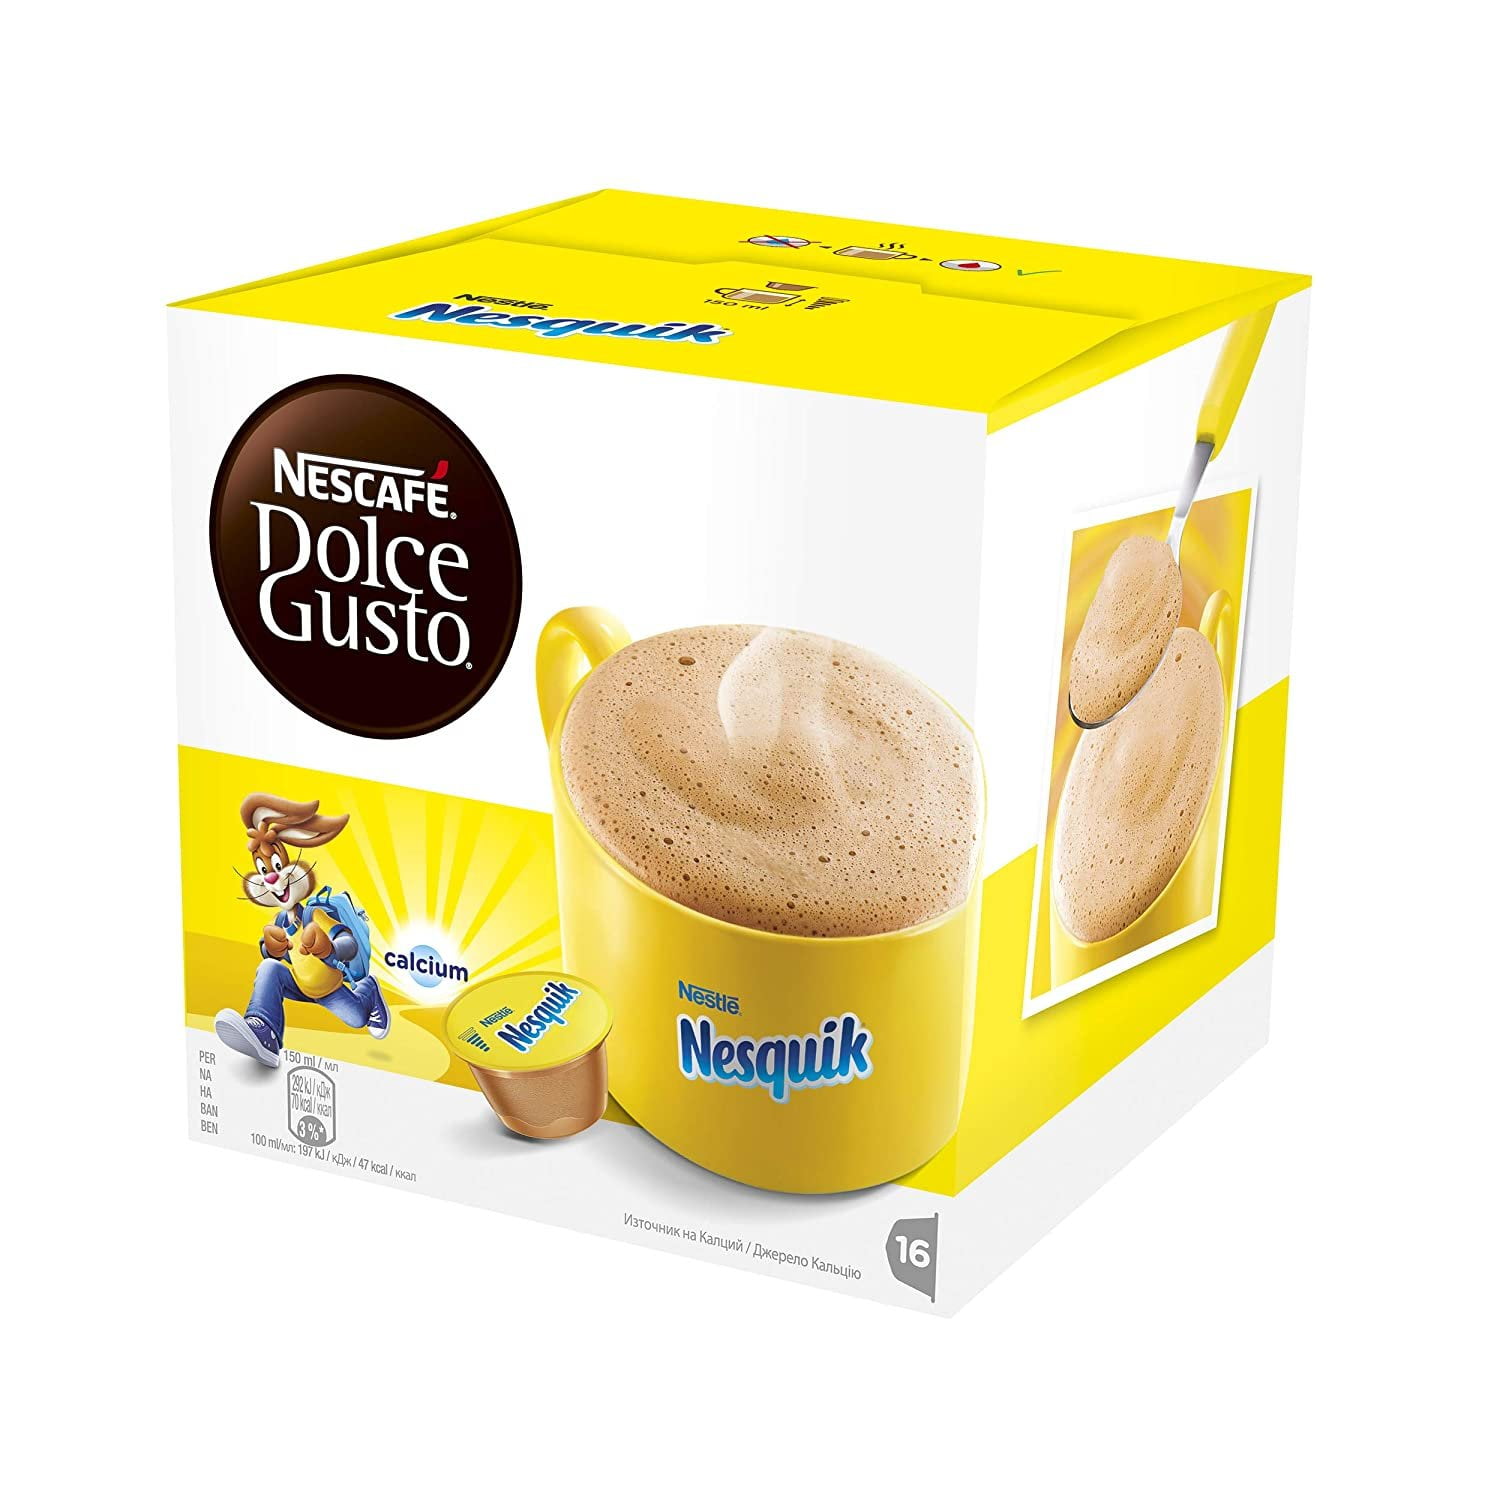 Nescafe Dolce Gusto for Nescafe Dolce Gusto Brewers, Chococino, 16 Count  (Pack of 3) - For Moms